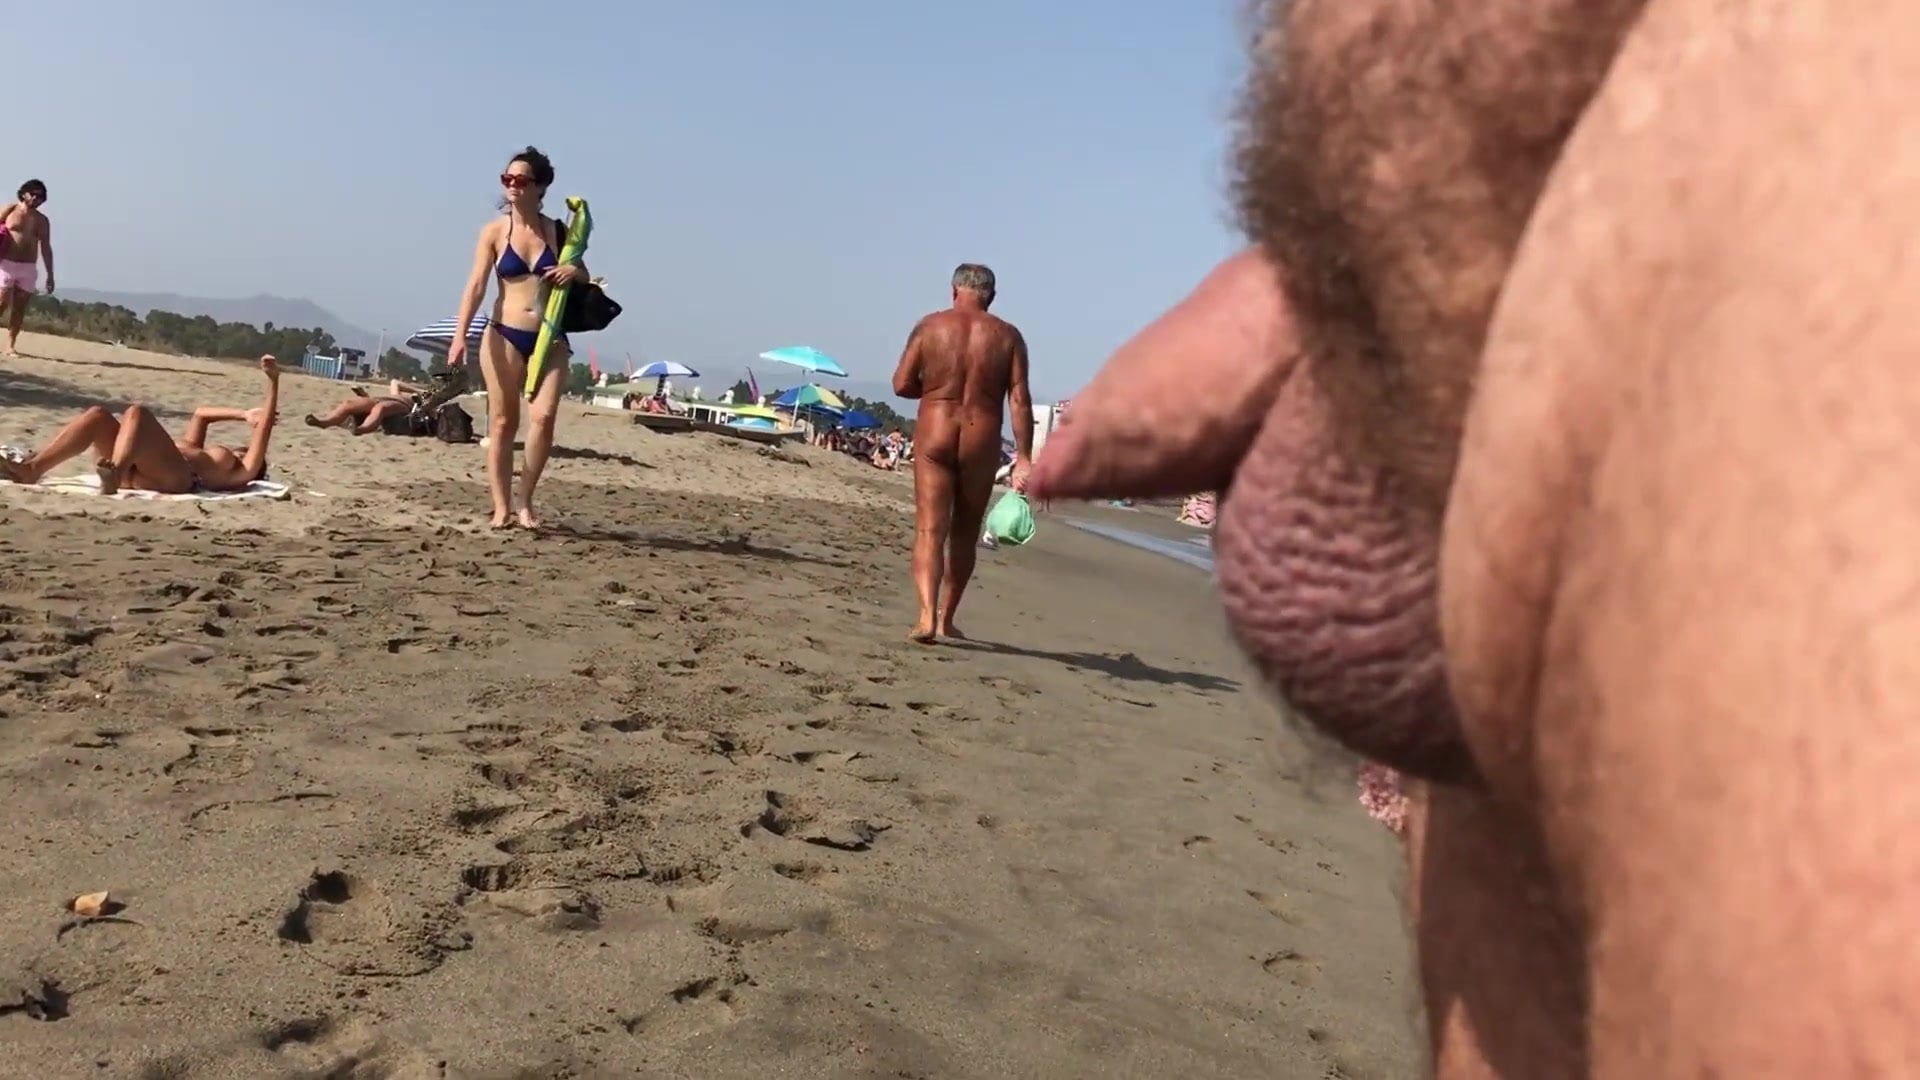 Small cock beach pics Sexy top rated image 100% free Comments: 1. 